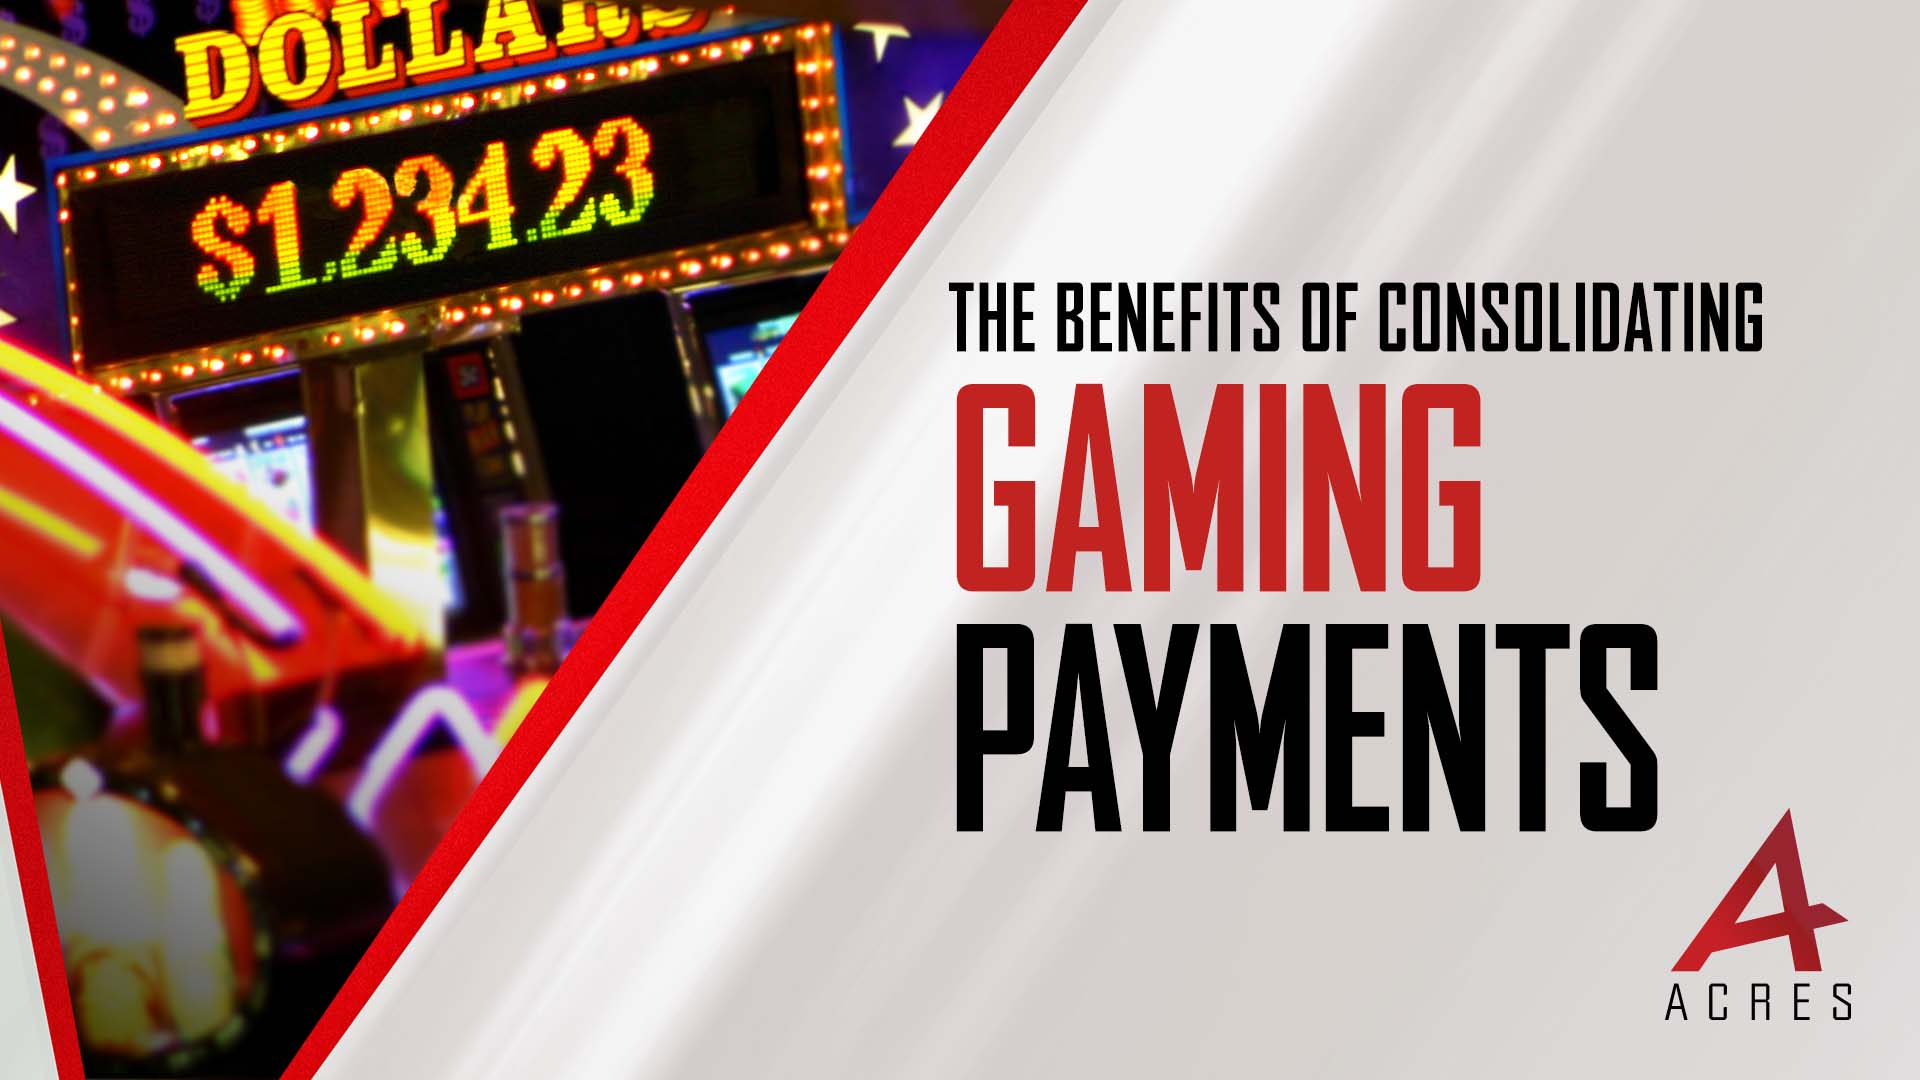 Benefits of consolidating gaming payments